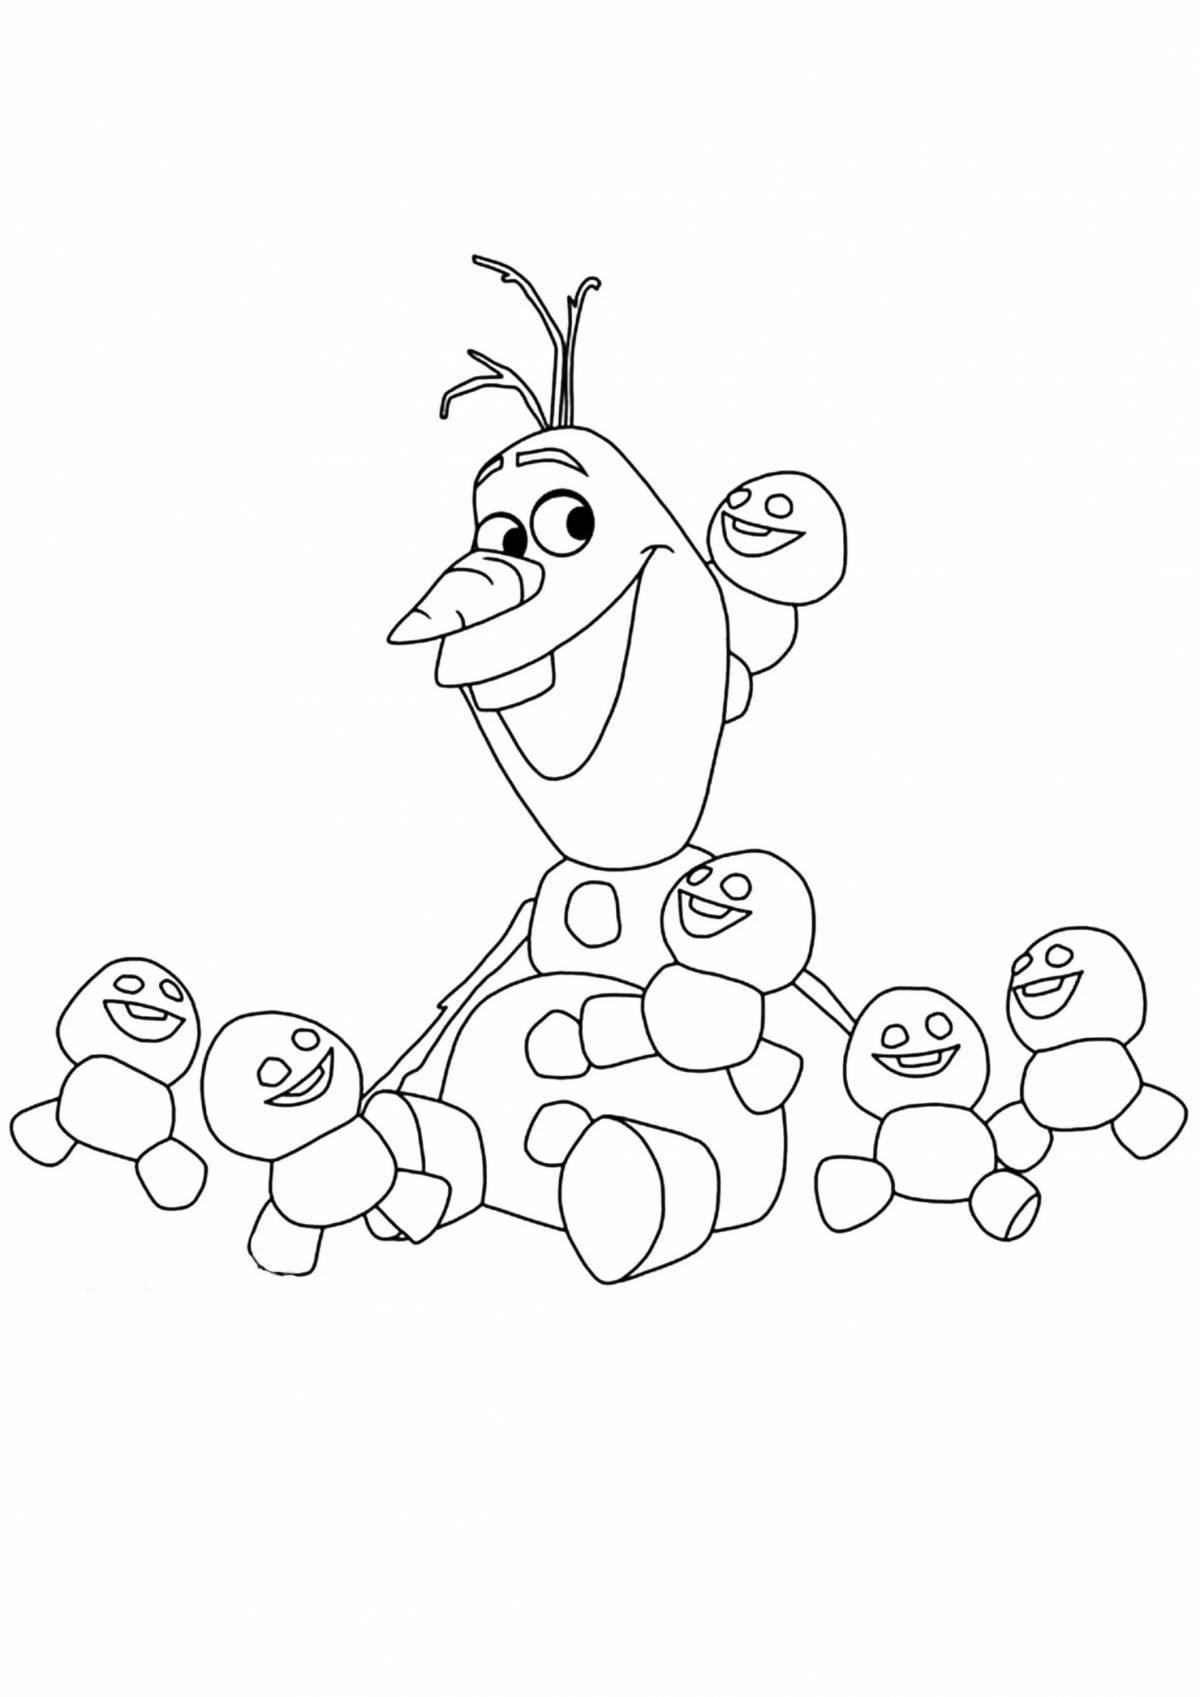 Olaf's Frozen Coloring Page